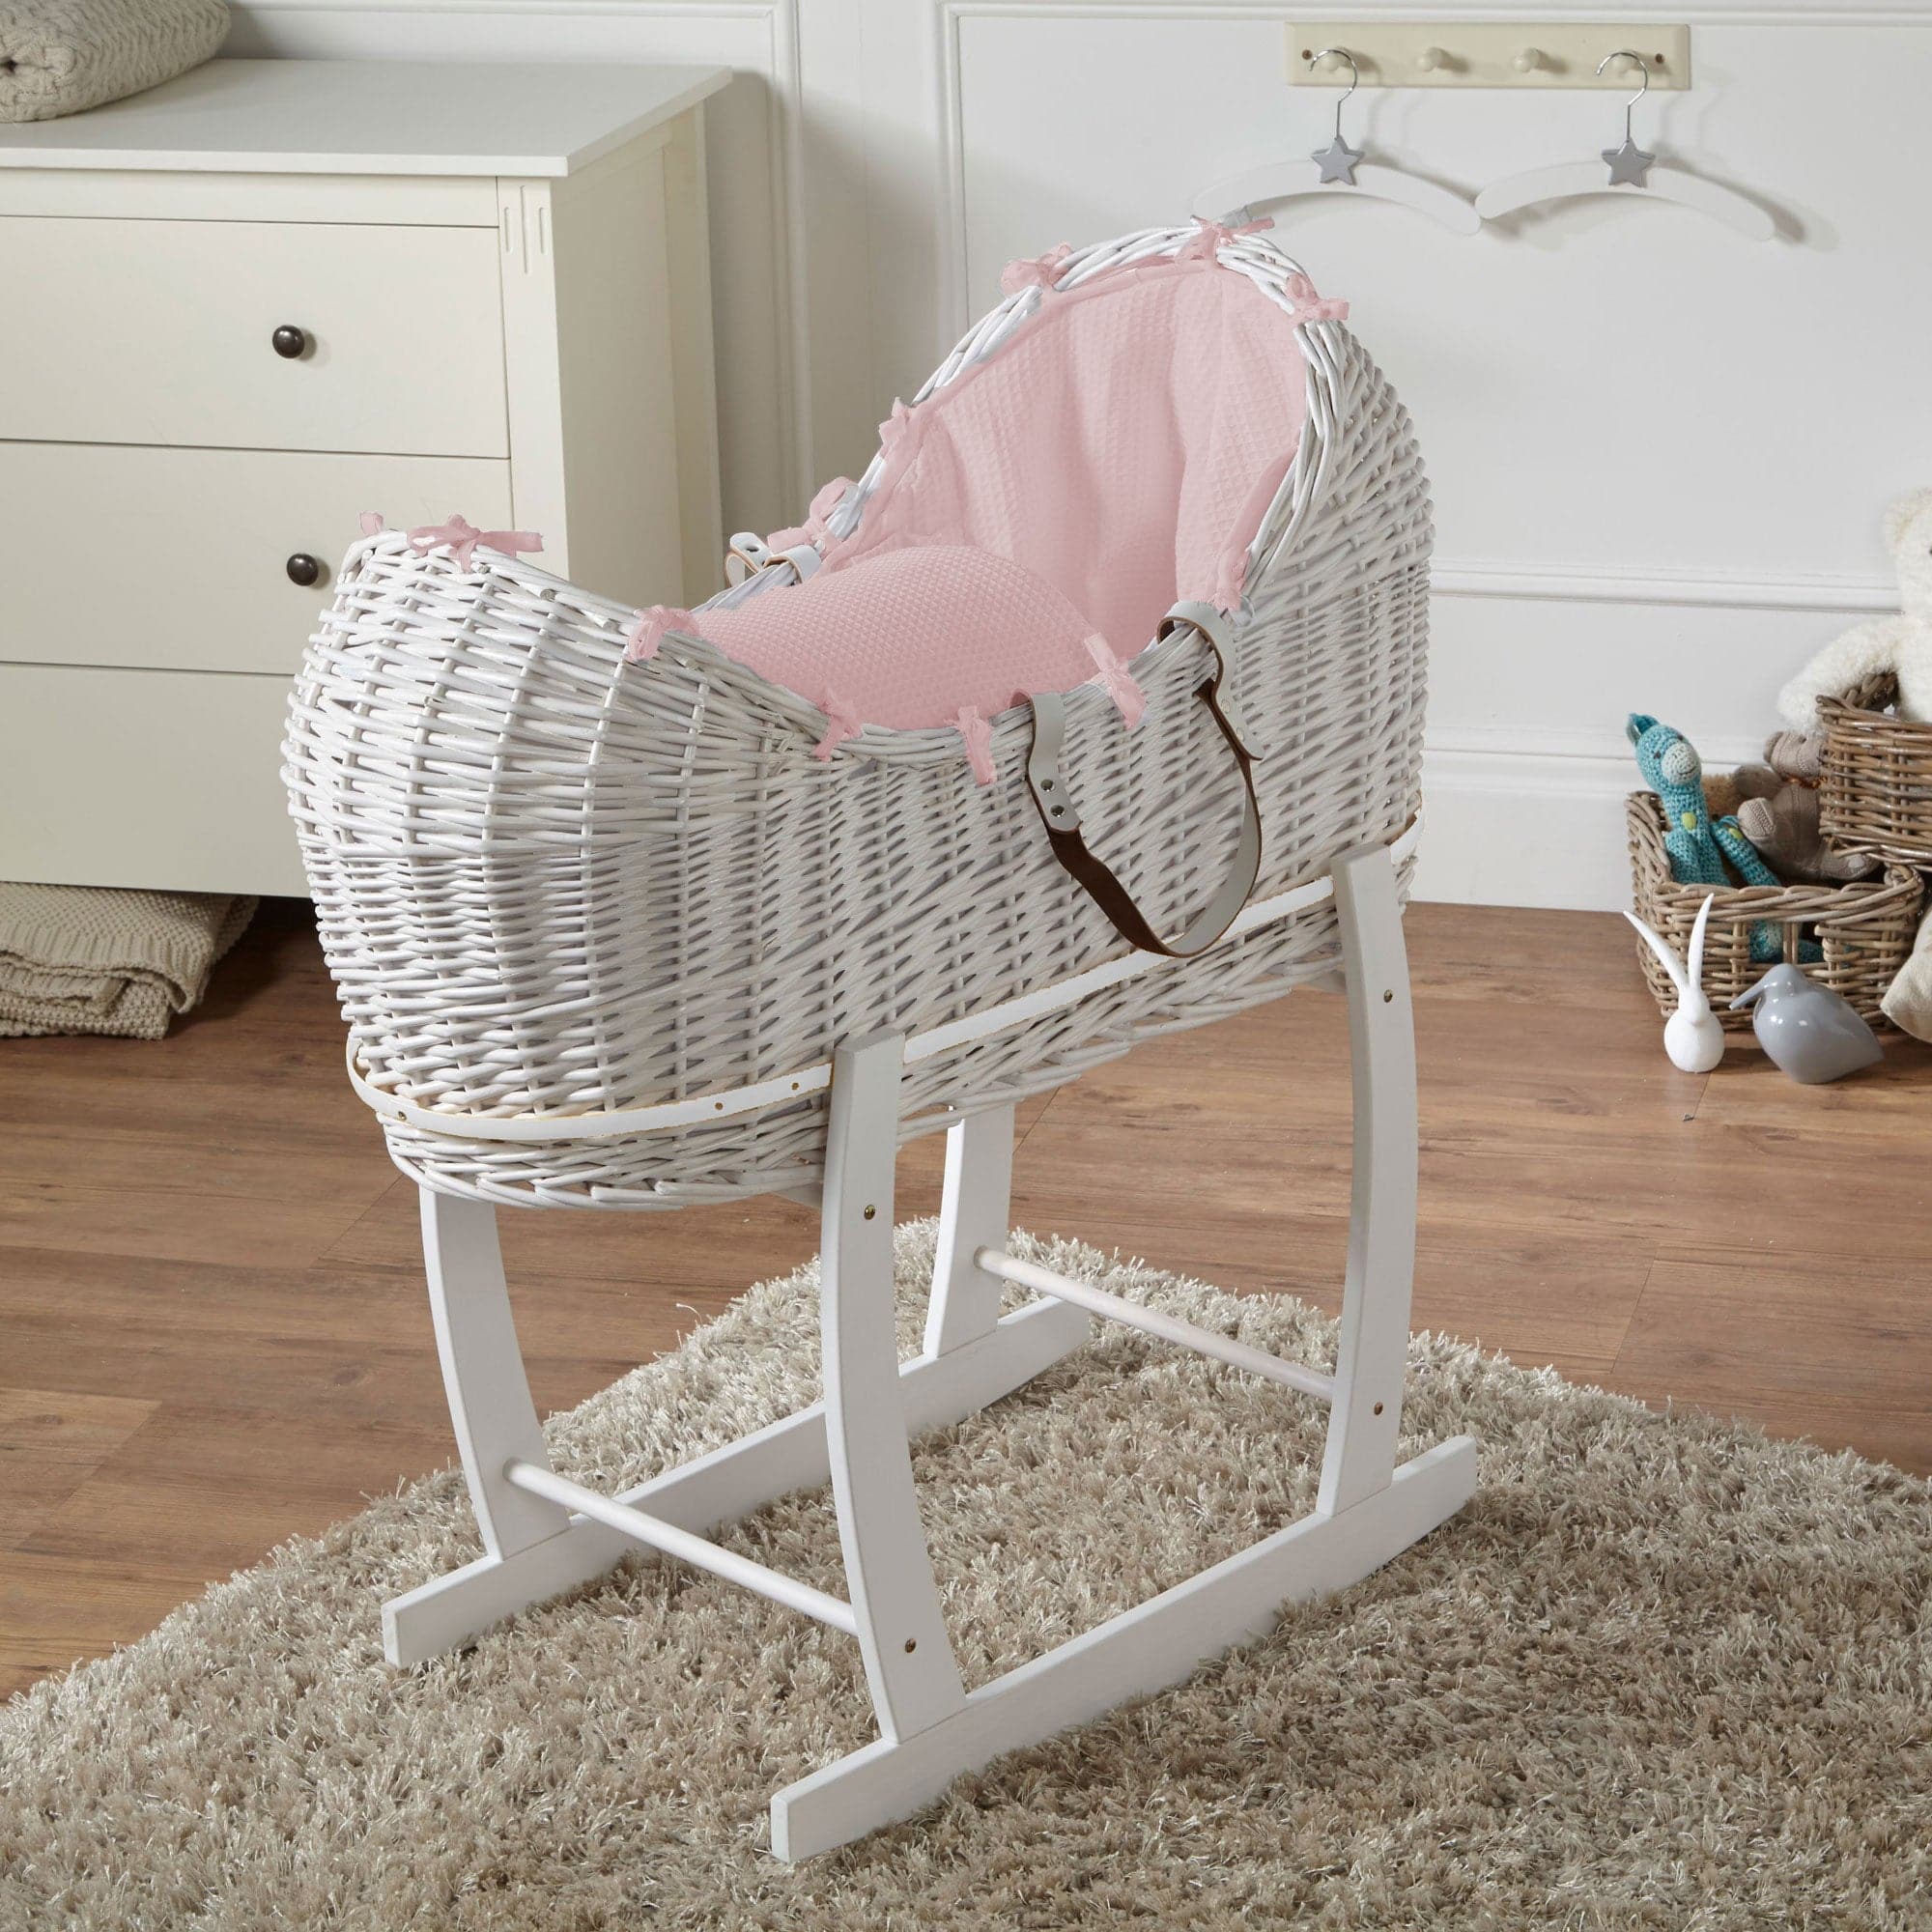 Wicker Deluxe Pod Baby Moses Basket With Stand - White / Waffle / Pink | For Your Little One